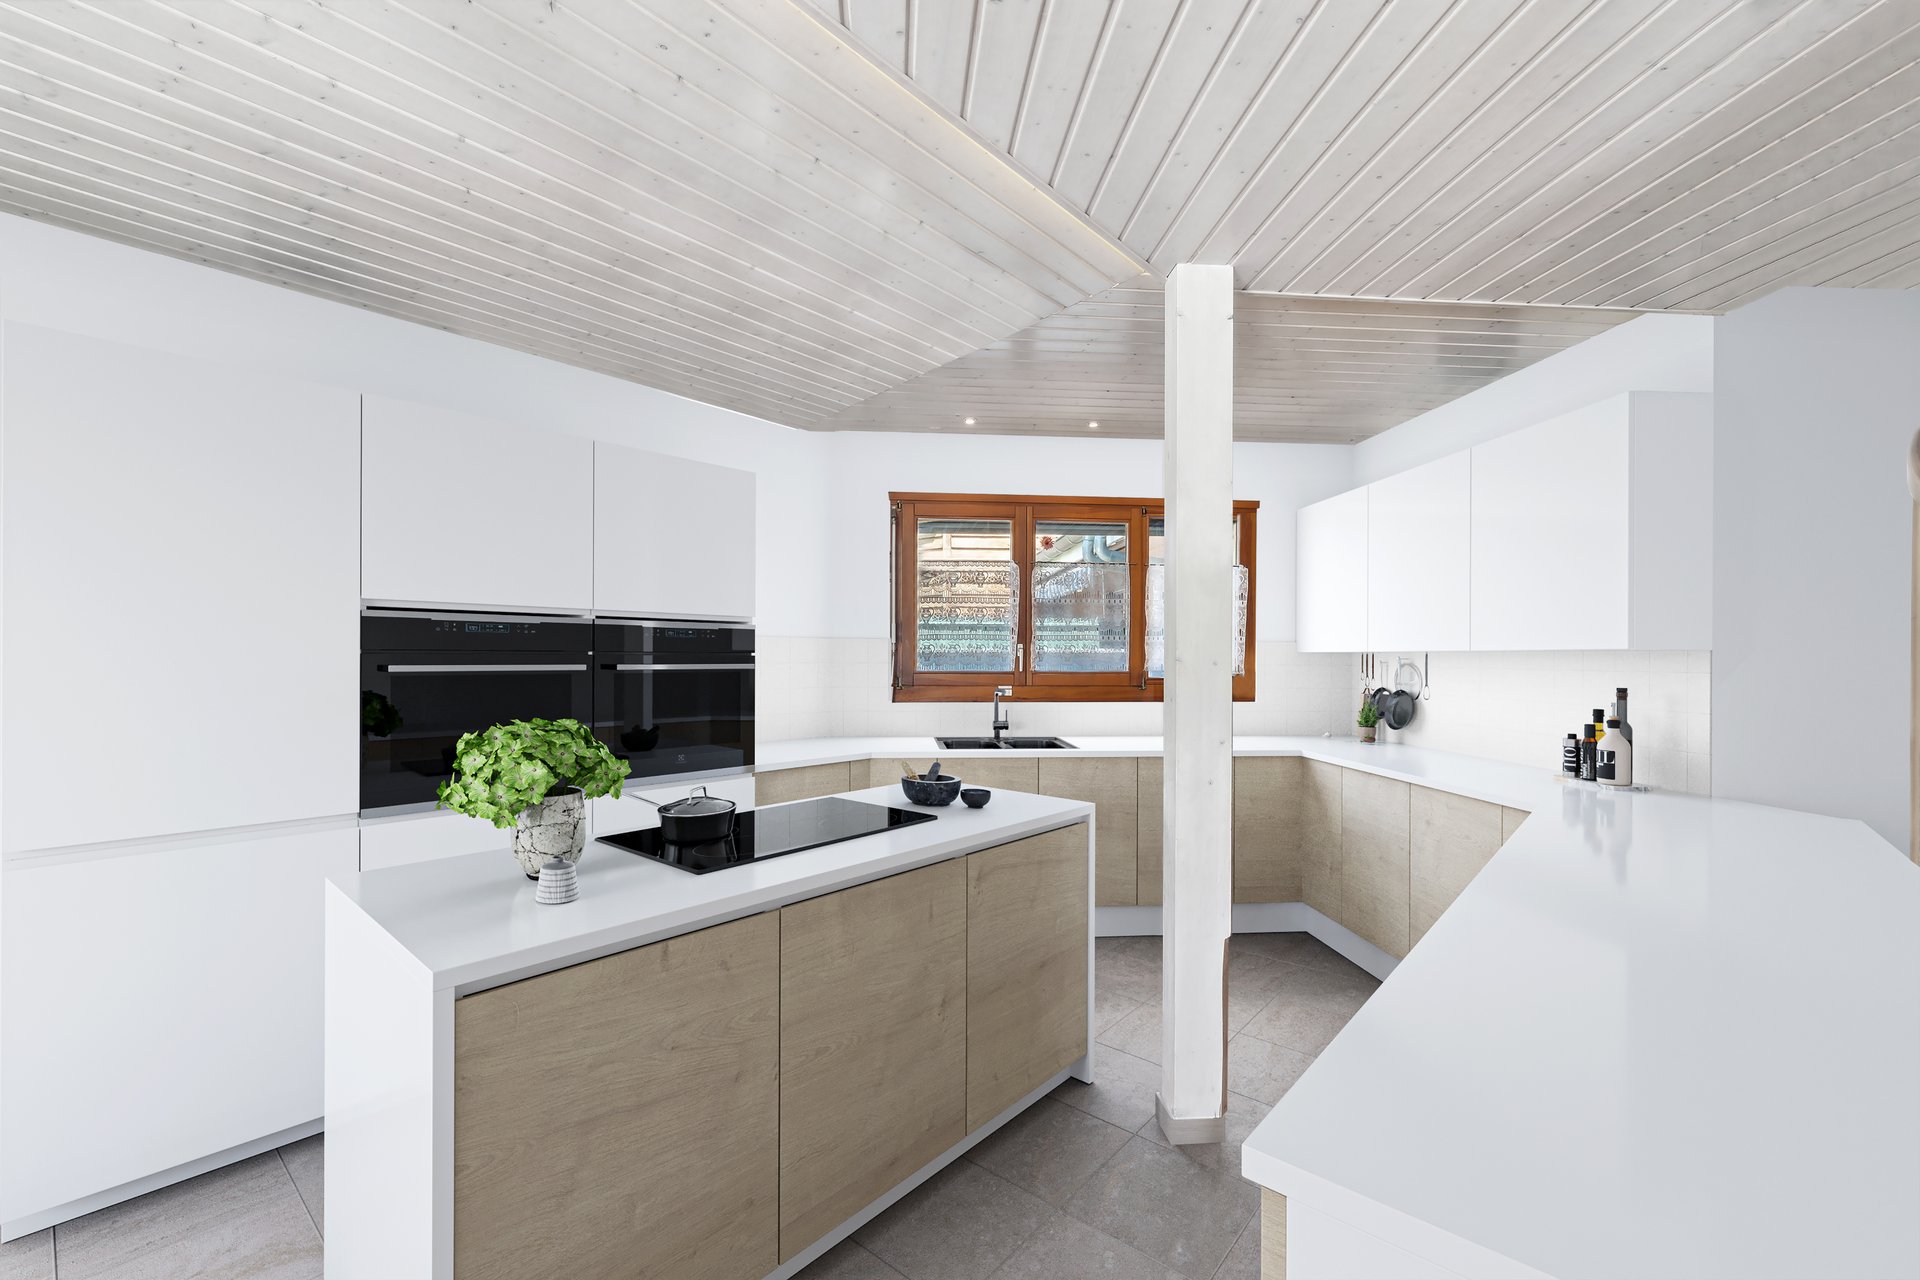 House in Troinex - Kitchen - Picture not contractual